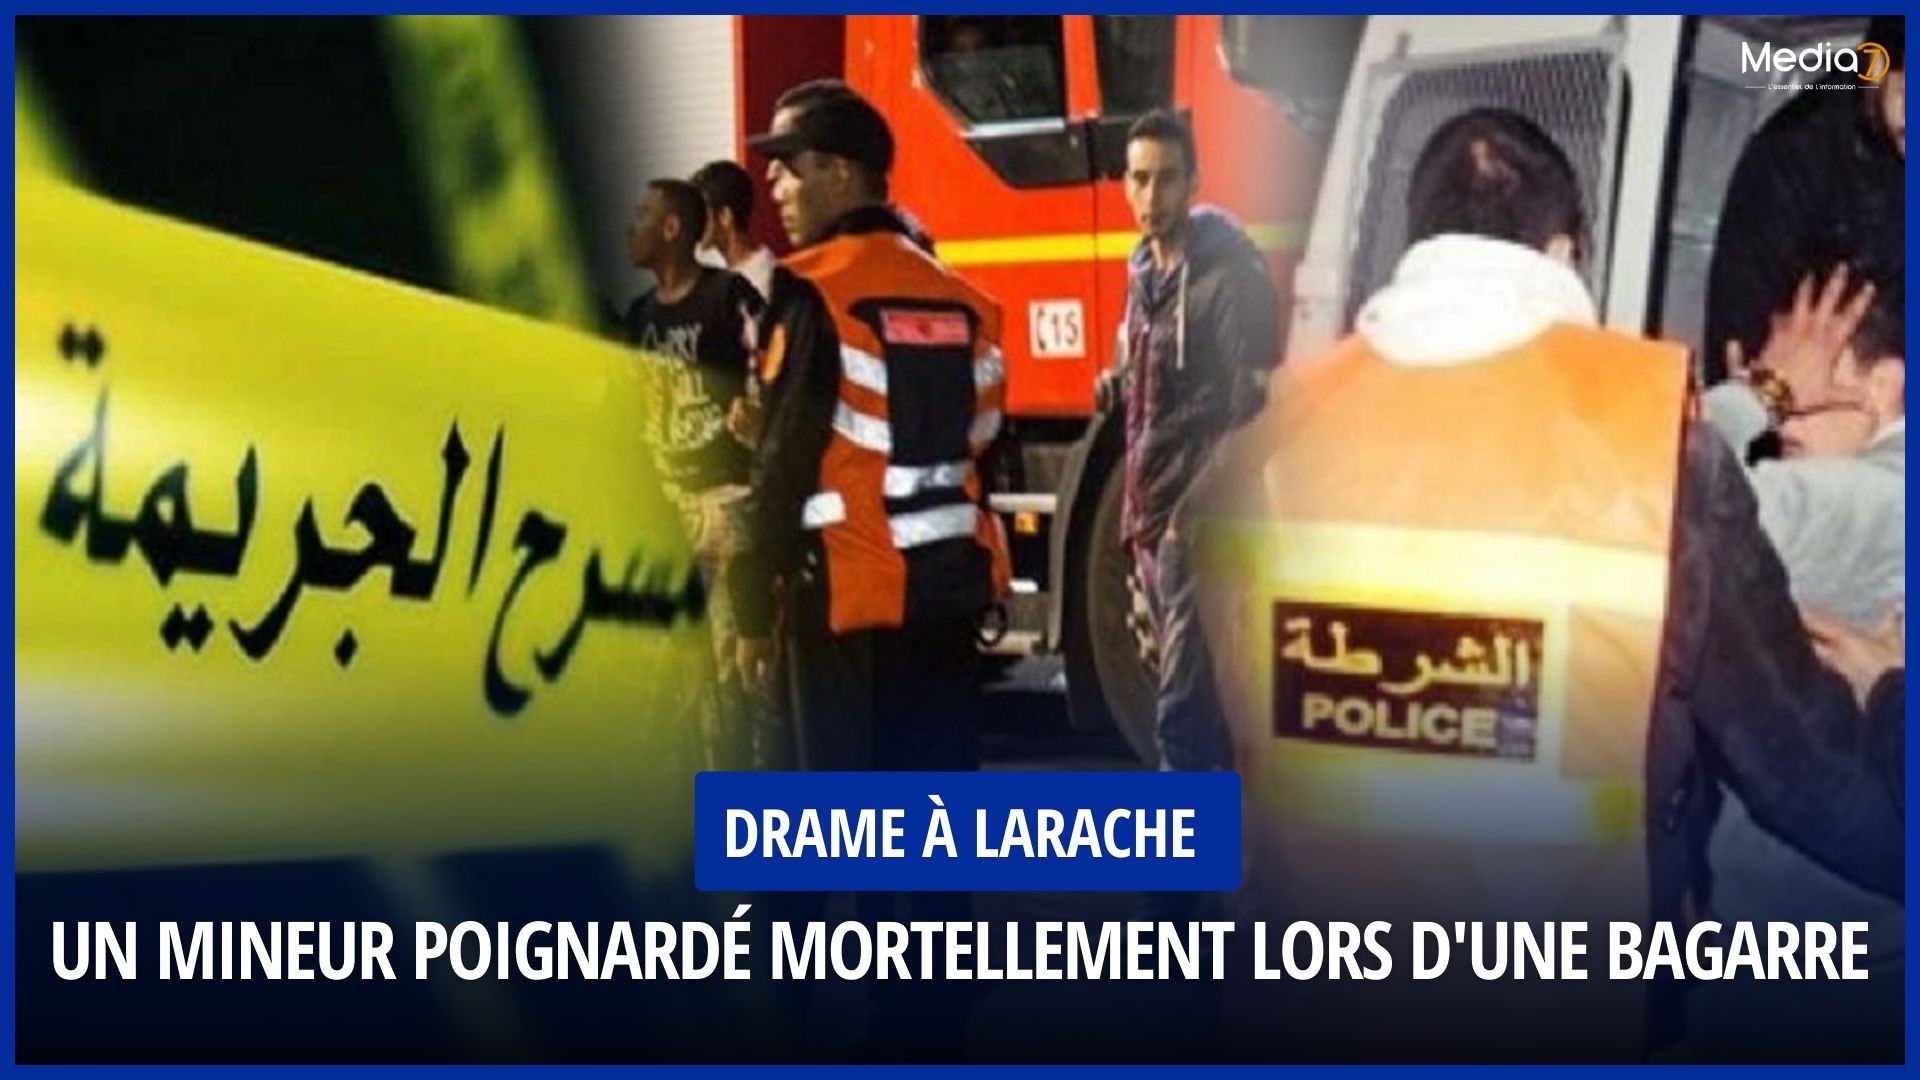 Drama in Larache: A Minor Fatally Stabbed During a Fight